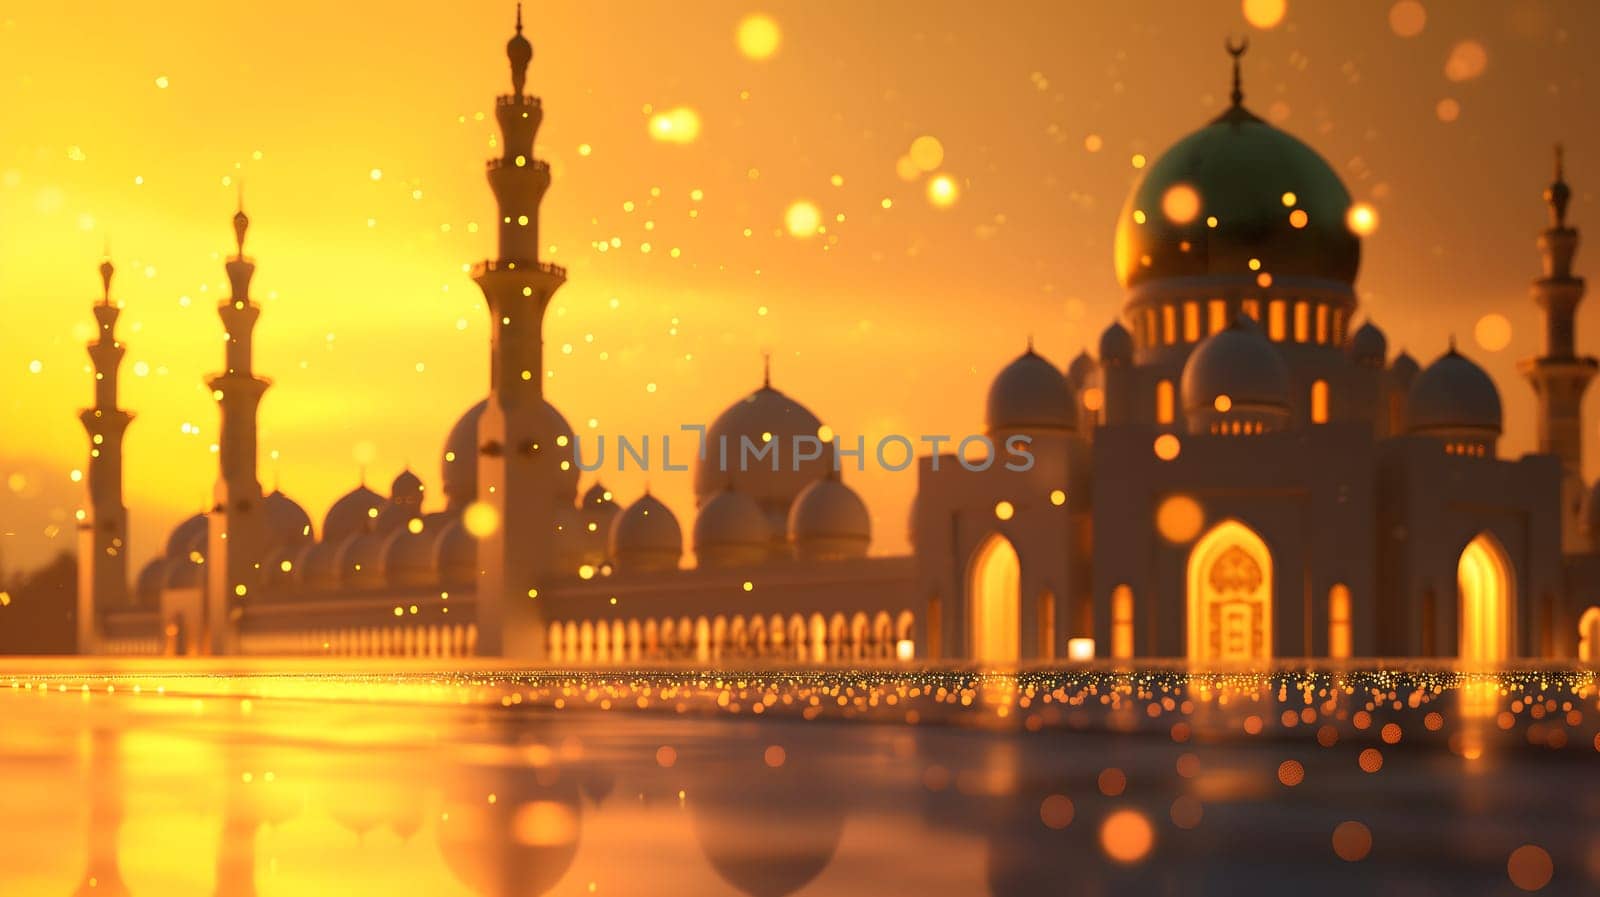 Ramadan mosque at golden dusk background, neural network generated image by z1b